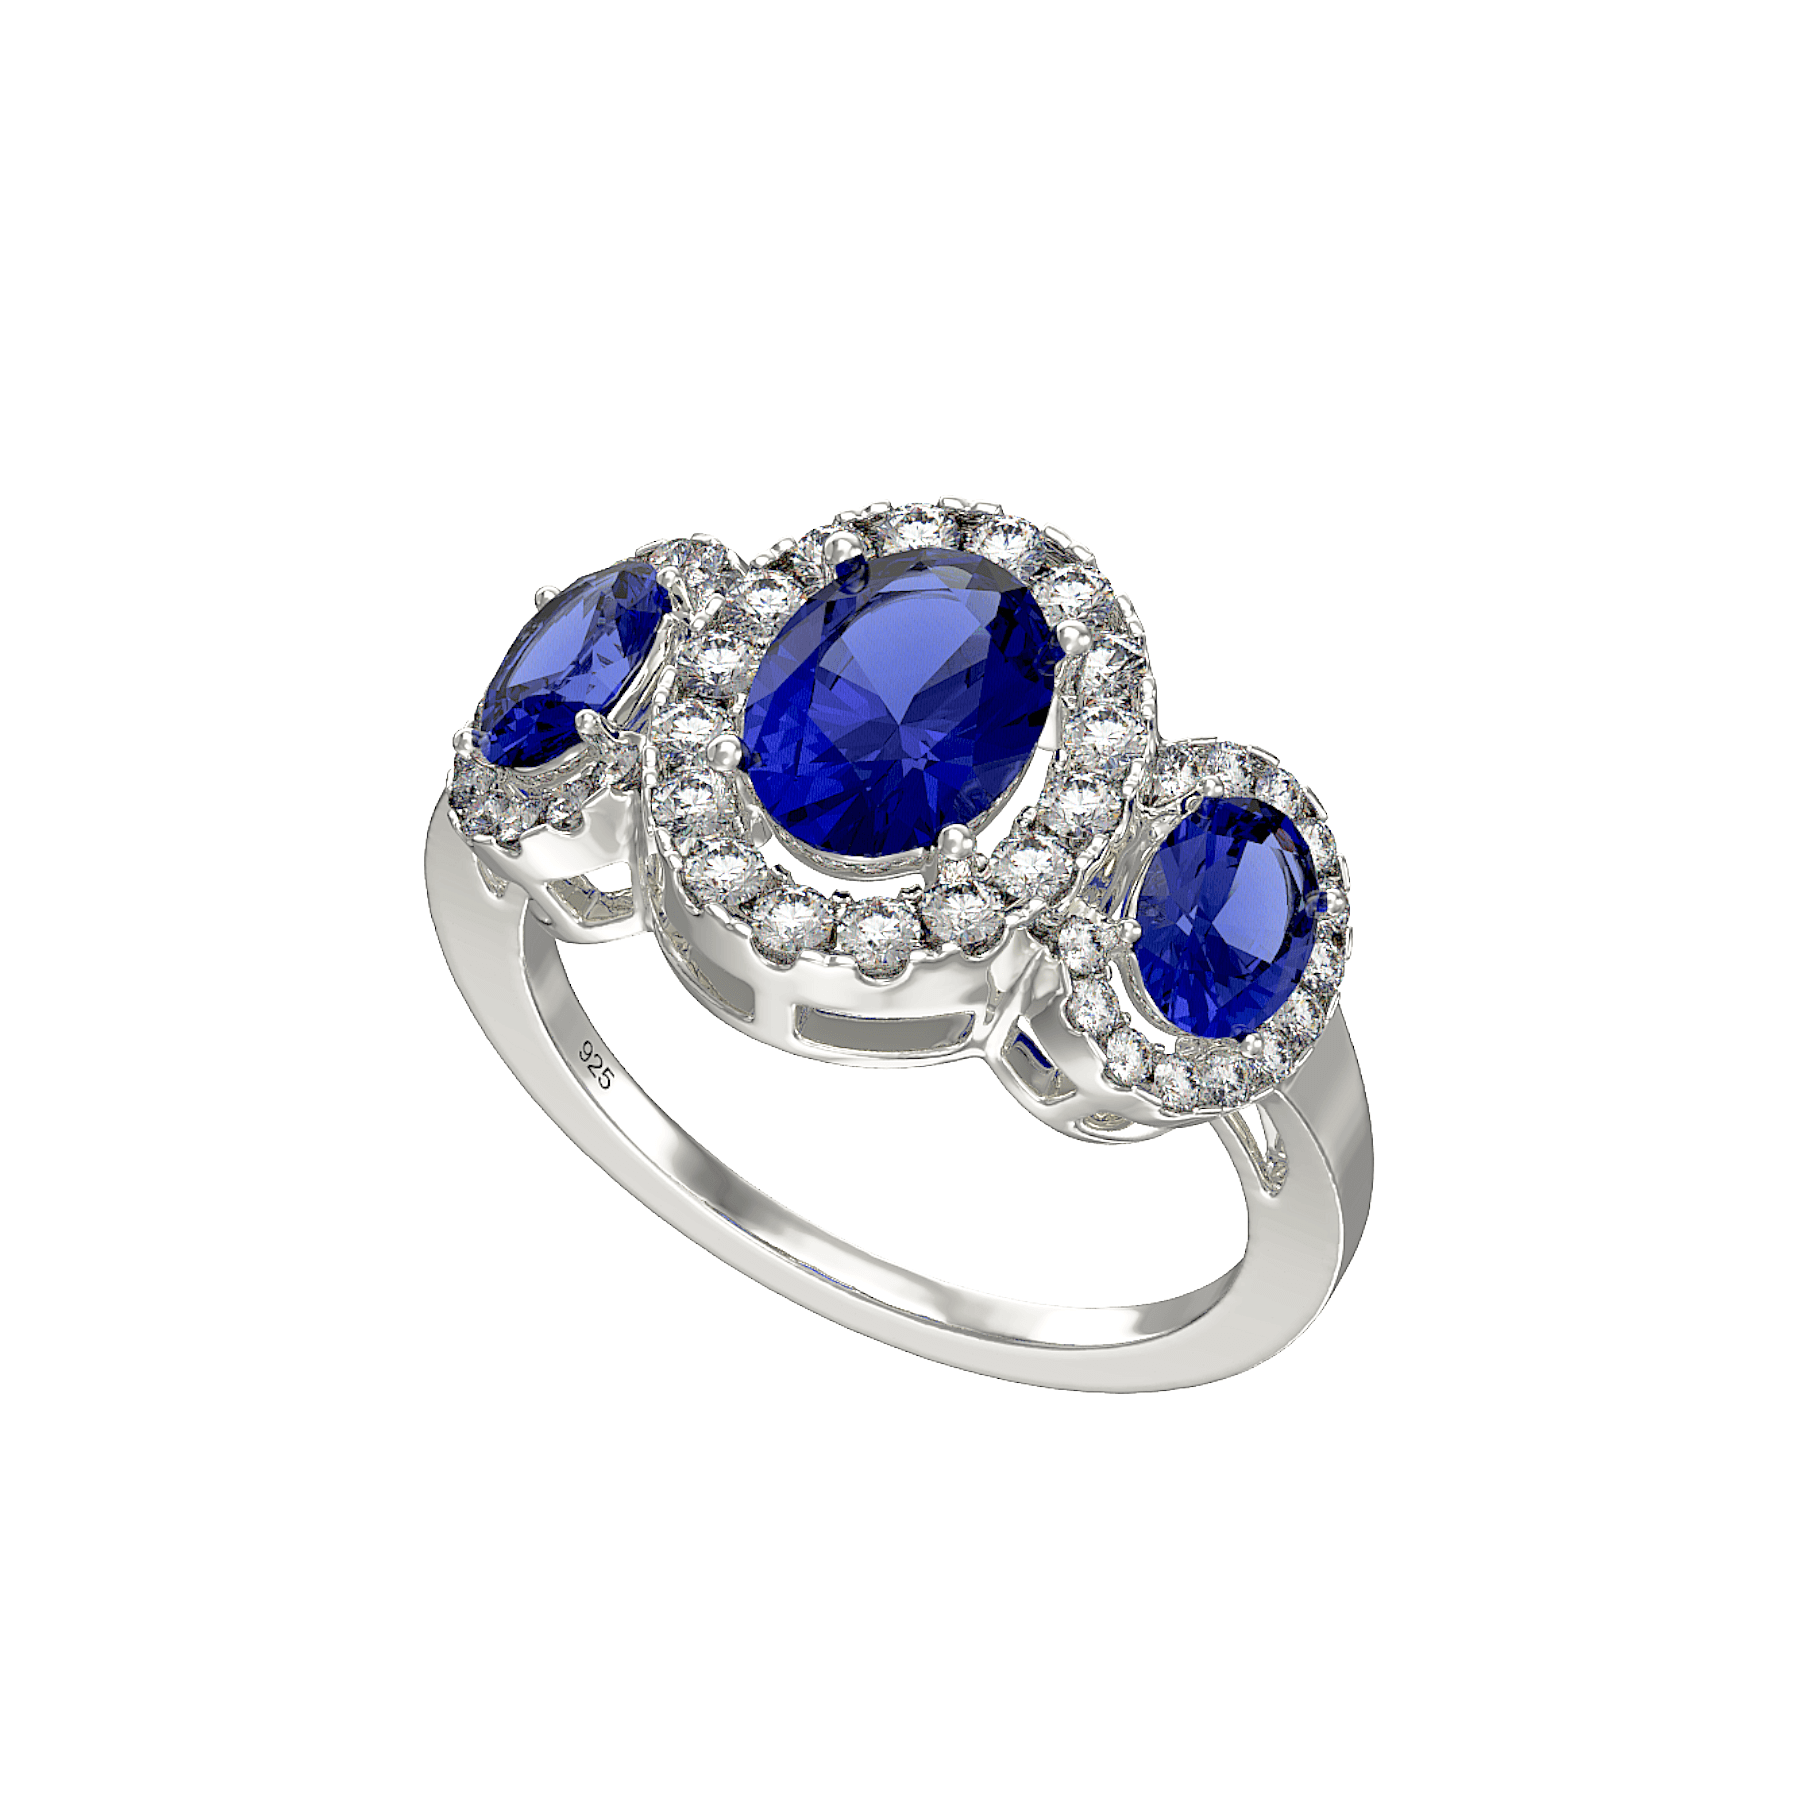 Rhodium Plated Sterling Silver Blue Cubic Zirconia Ring SR125C - Minar Jewellers